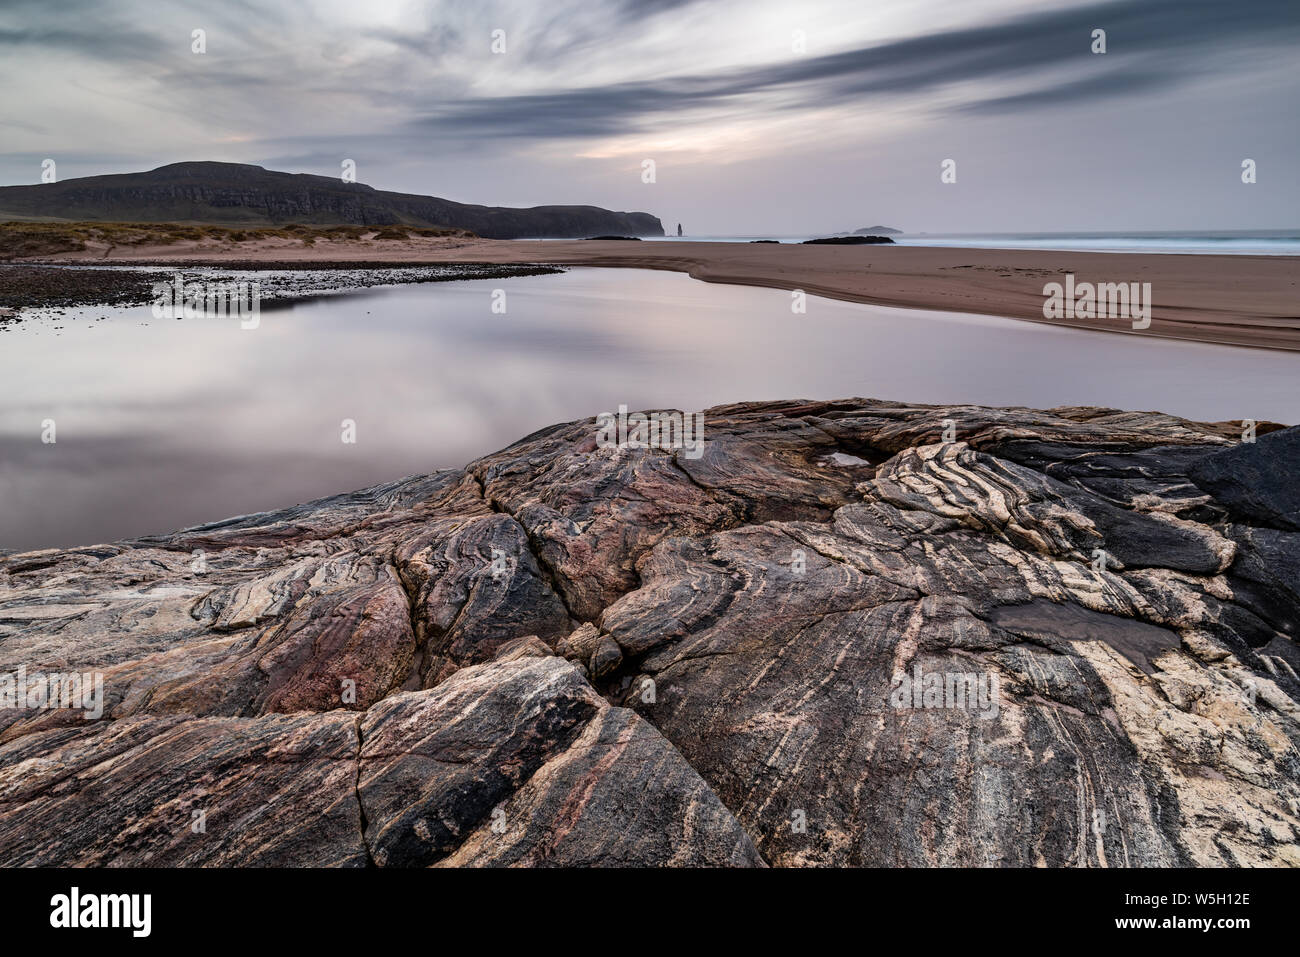 Sandwood Bay, with Am Buachaille sea stack in far distance, Sutherland, Scotland, United Kingdom, Europe Stock Photo